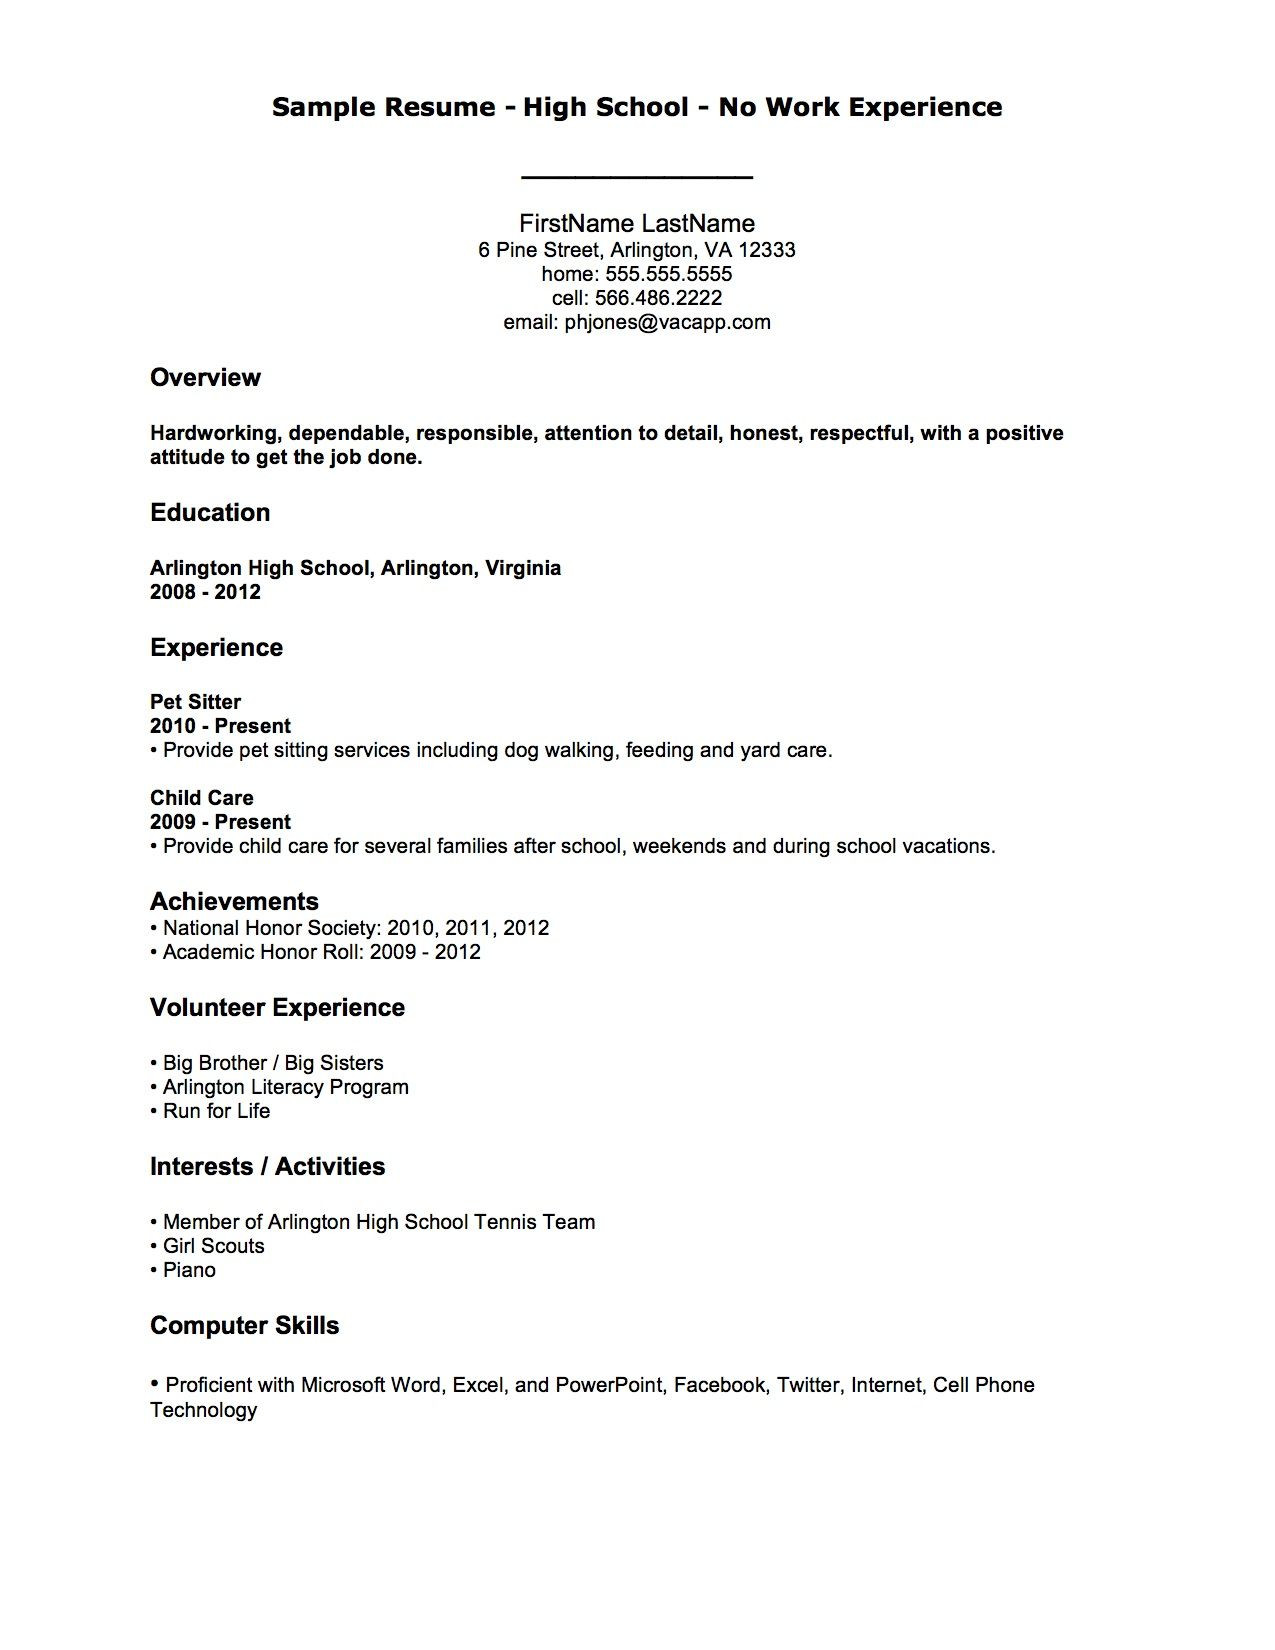 Resume for No Job Experience Sample Resume Examples with No Job Experience , #examples #experience …